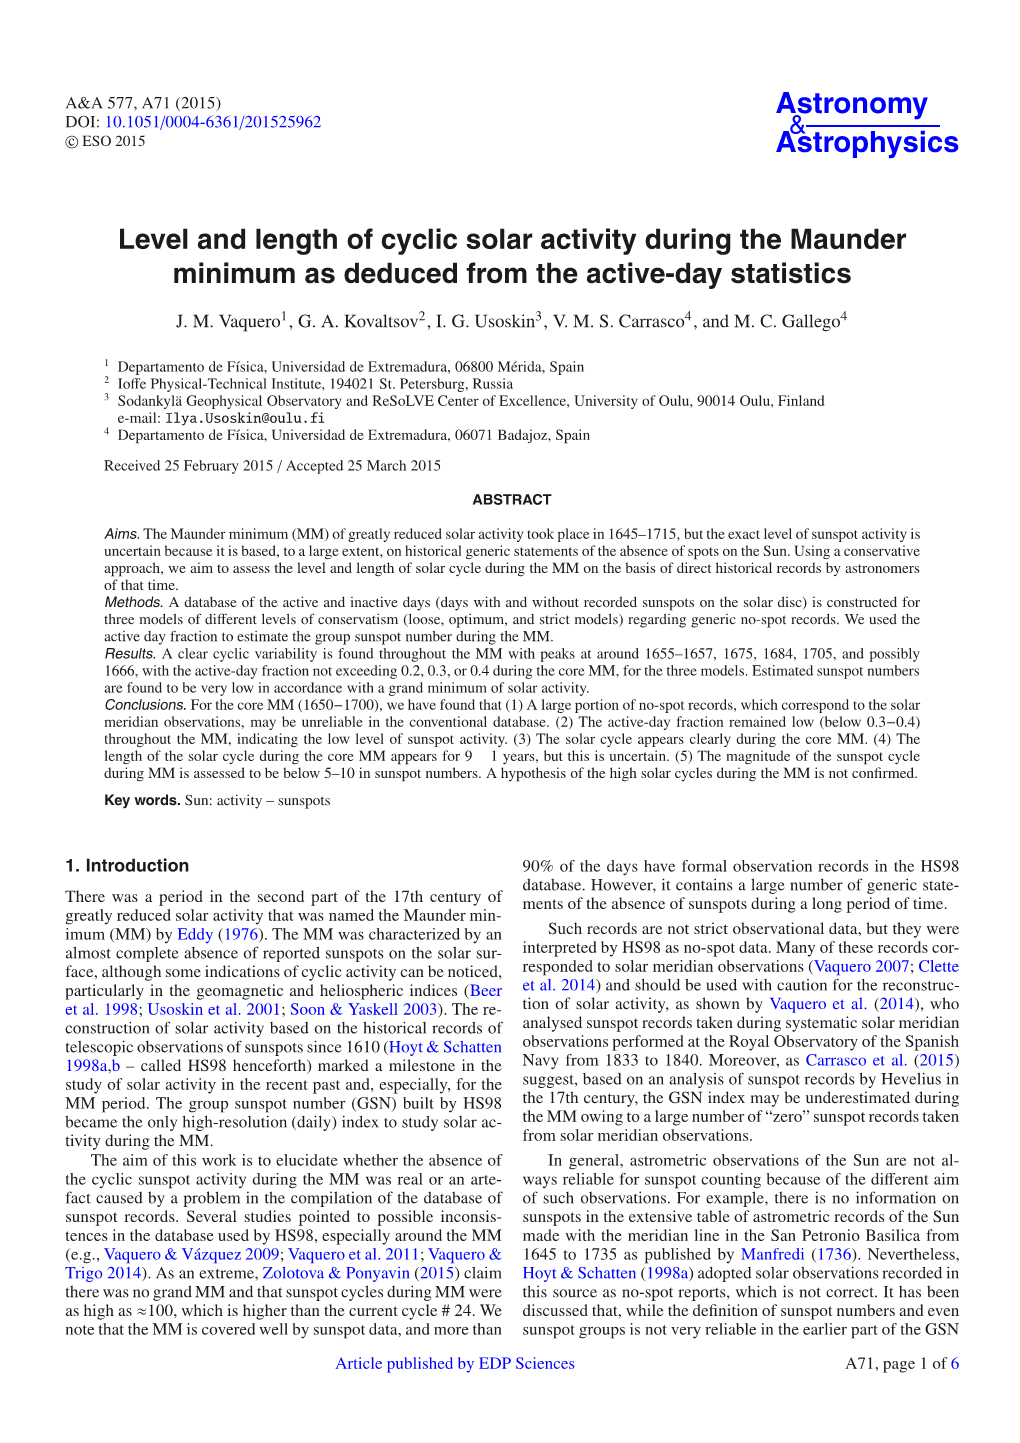 Level and Length of Cyclic Solar Activity During the Maunder Minimum As Deduced from the Active-Day Statistics